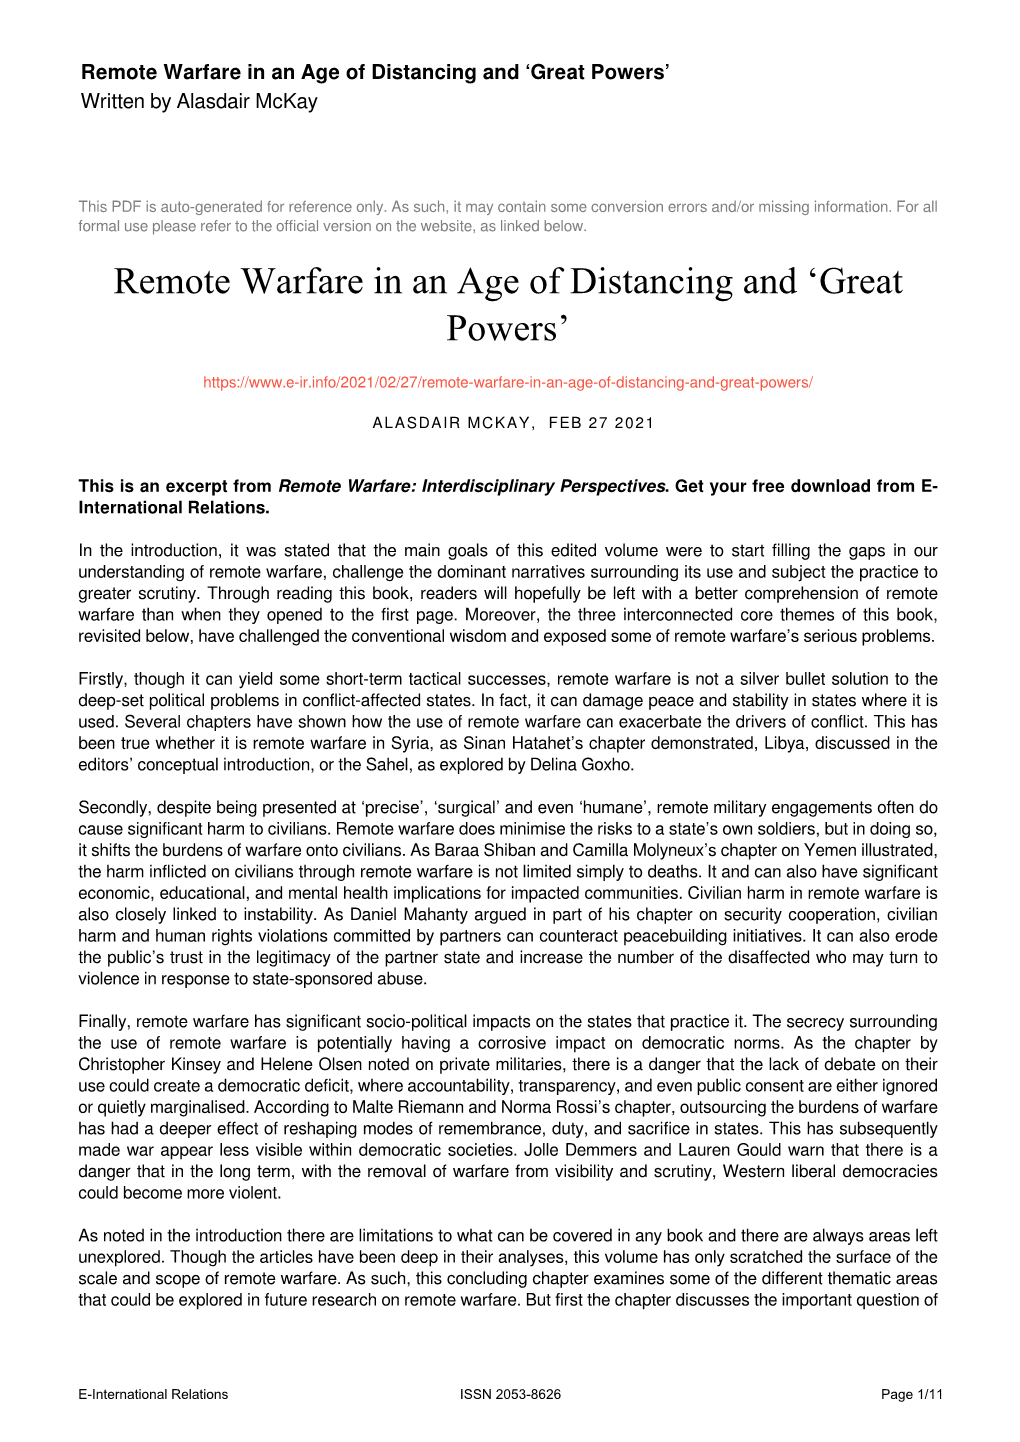 Remote Warfare in an Age of Distancing and ‘Great Powers’ Written by Alasdair Mckay